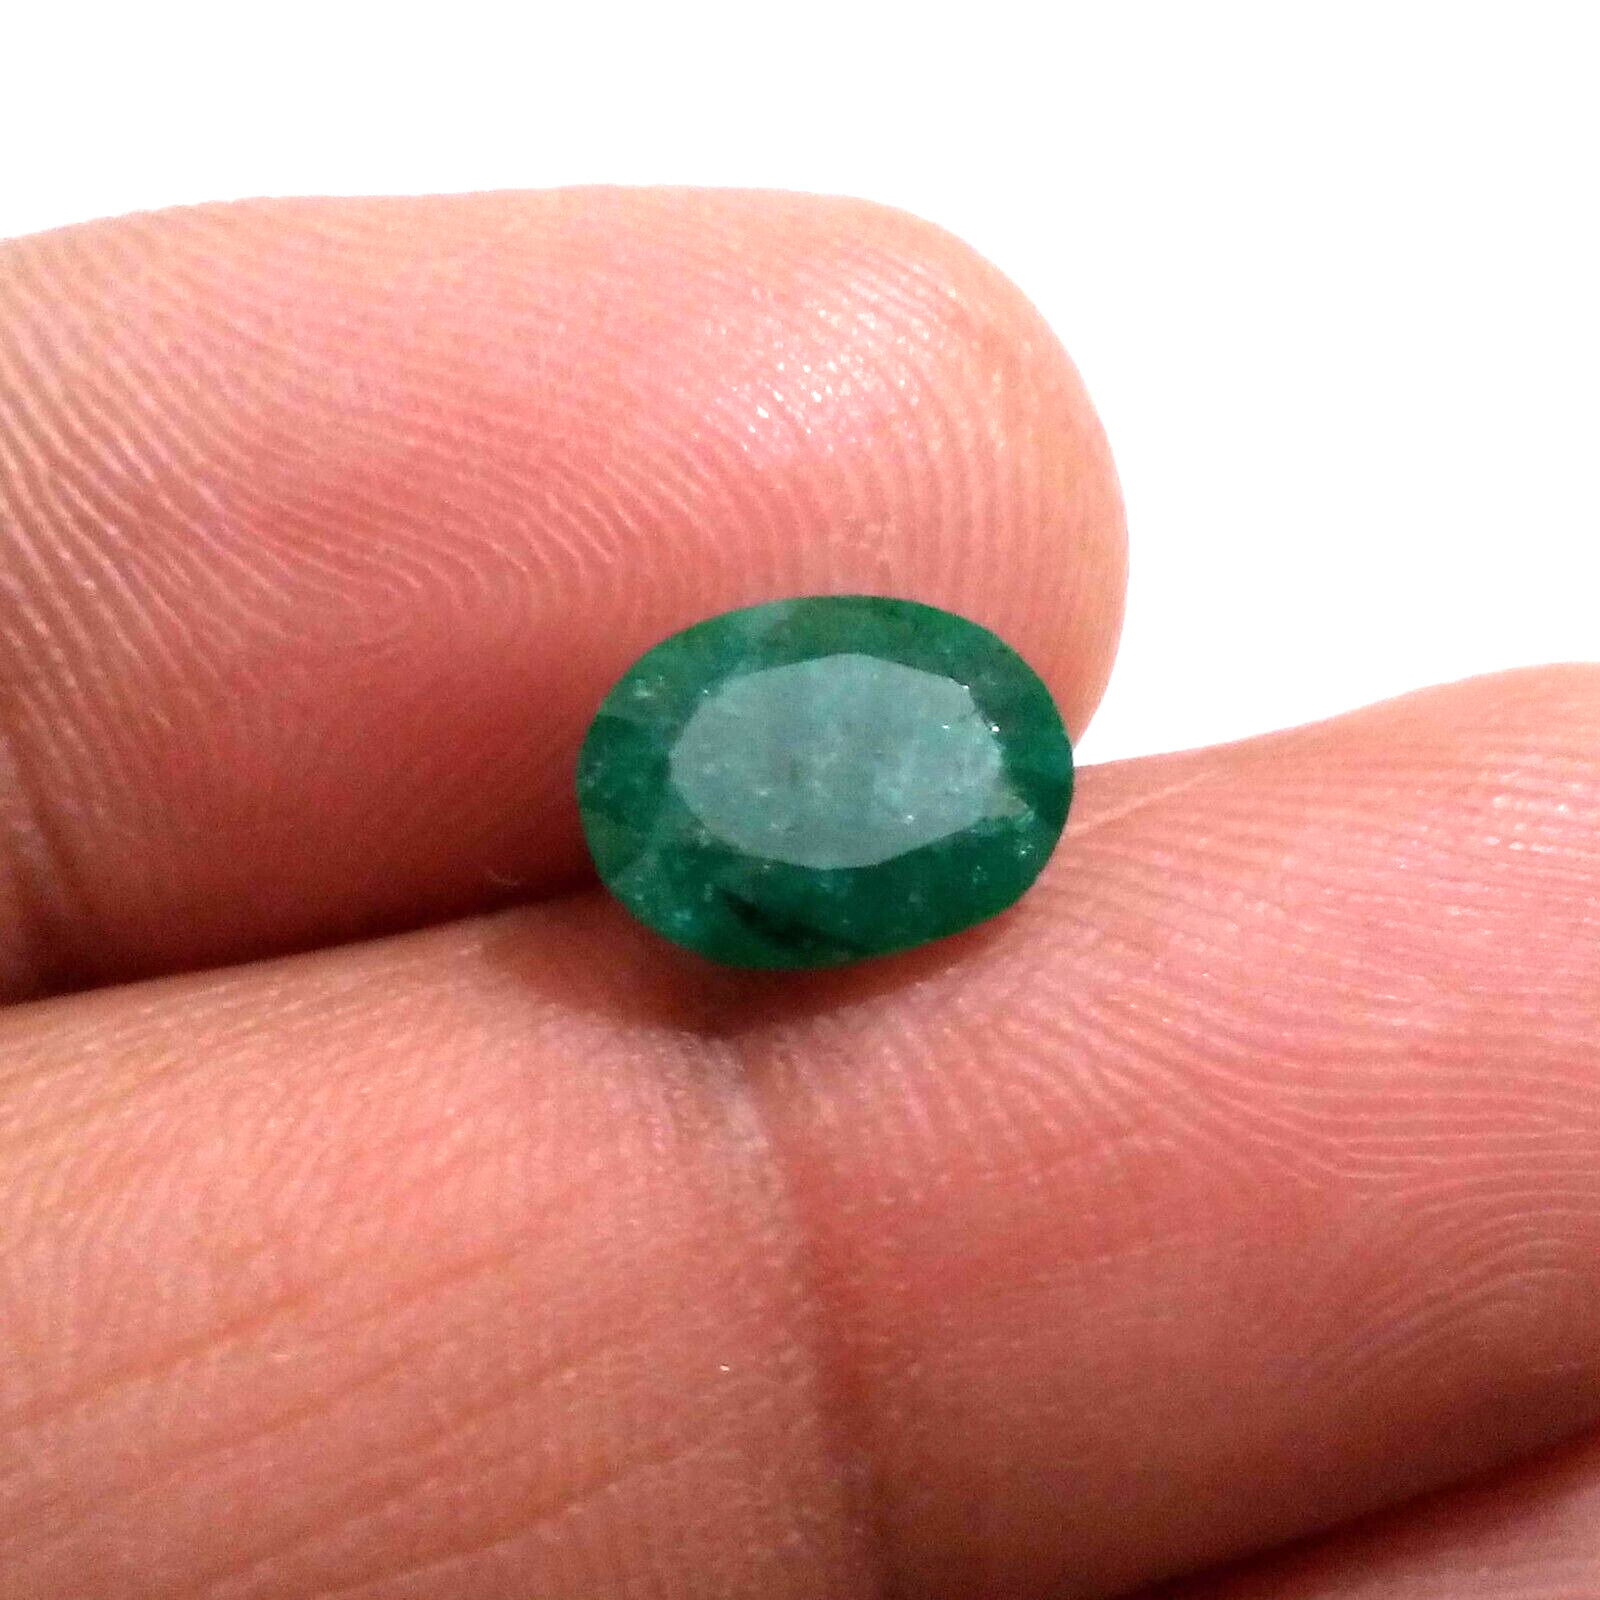 Unique Zambian Emerald Oval Shape 2.35 Crt Pretty Green Faceted Loose Gemstone